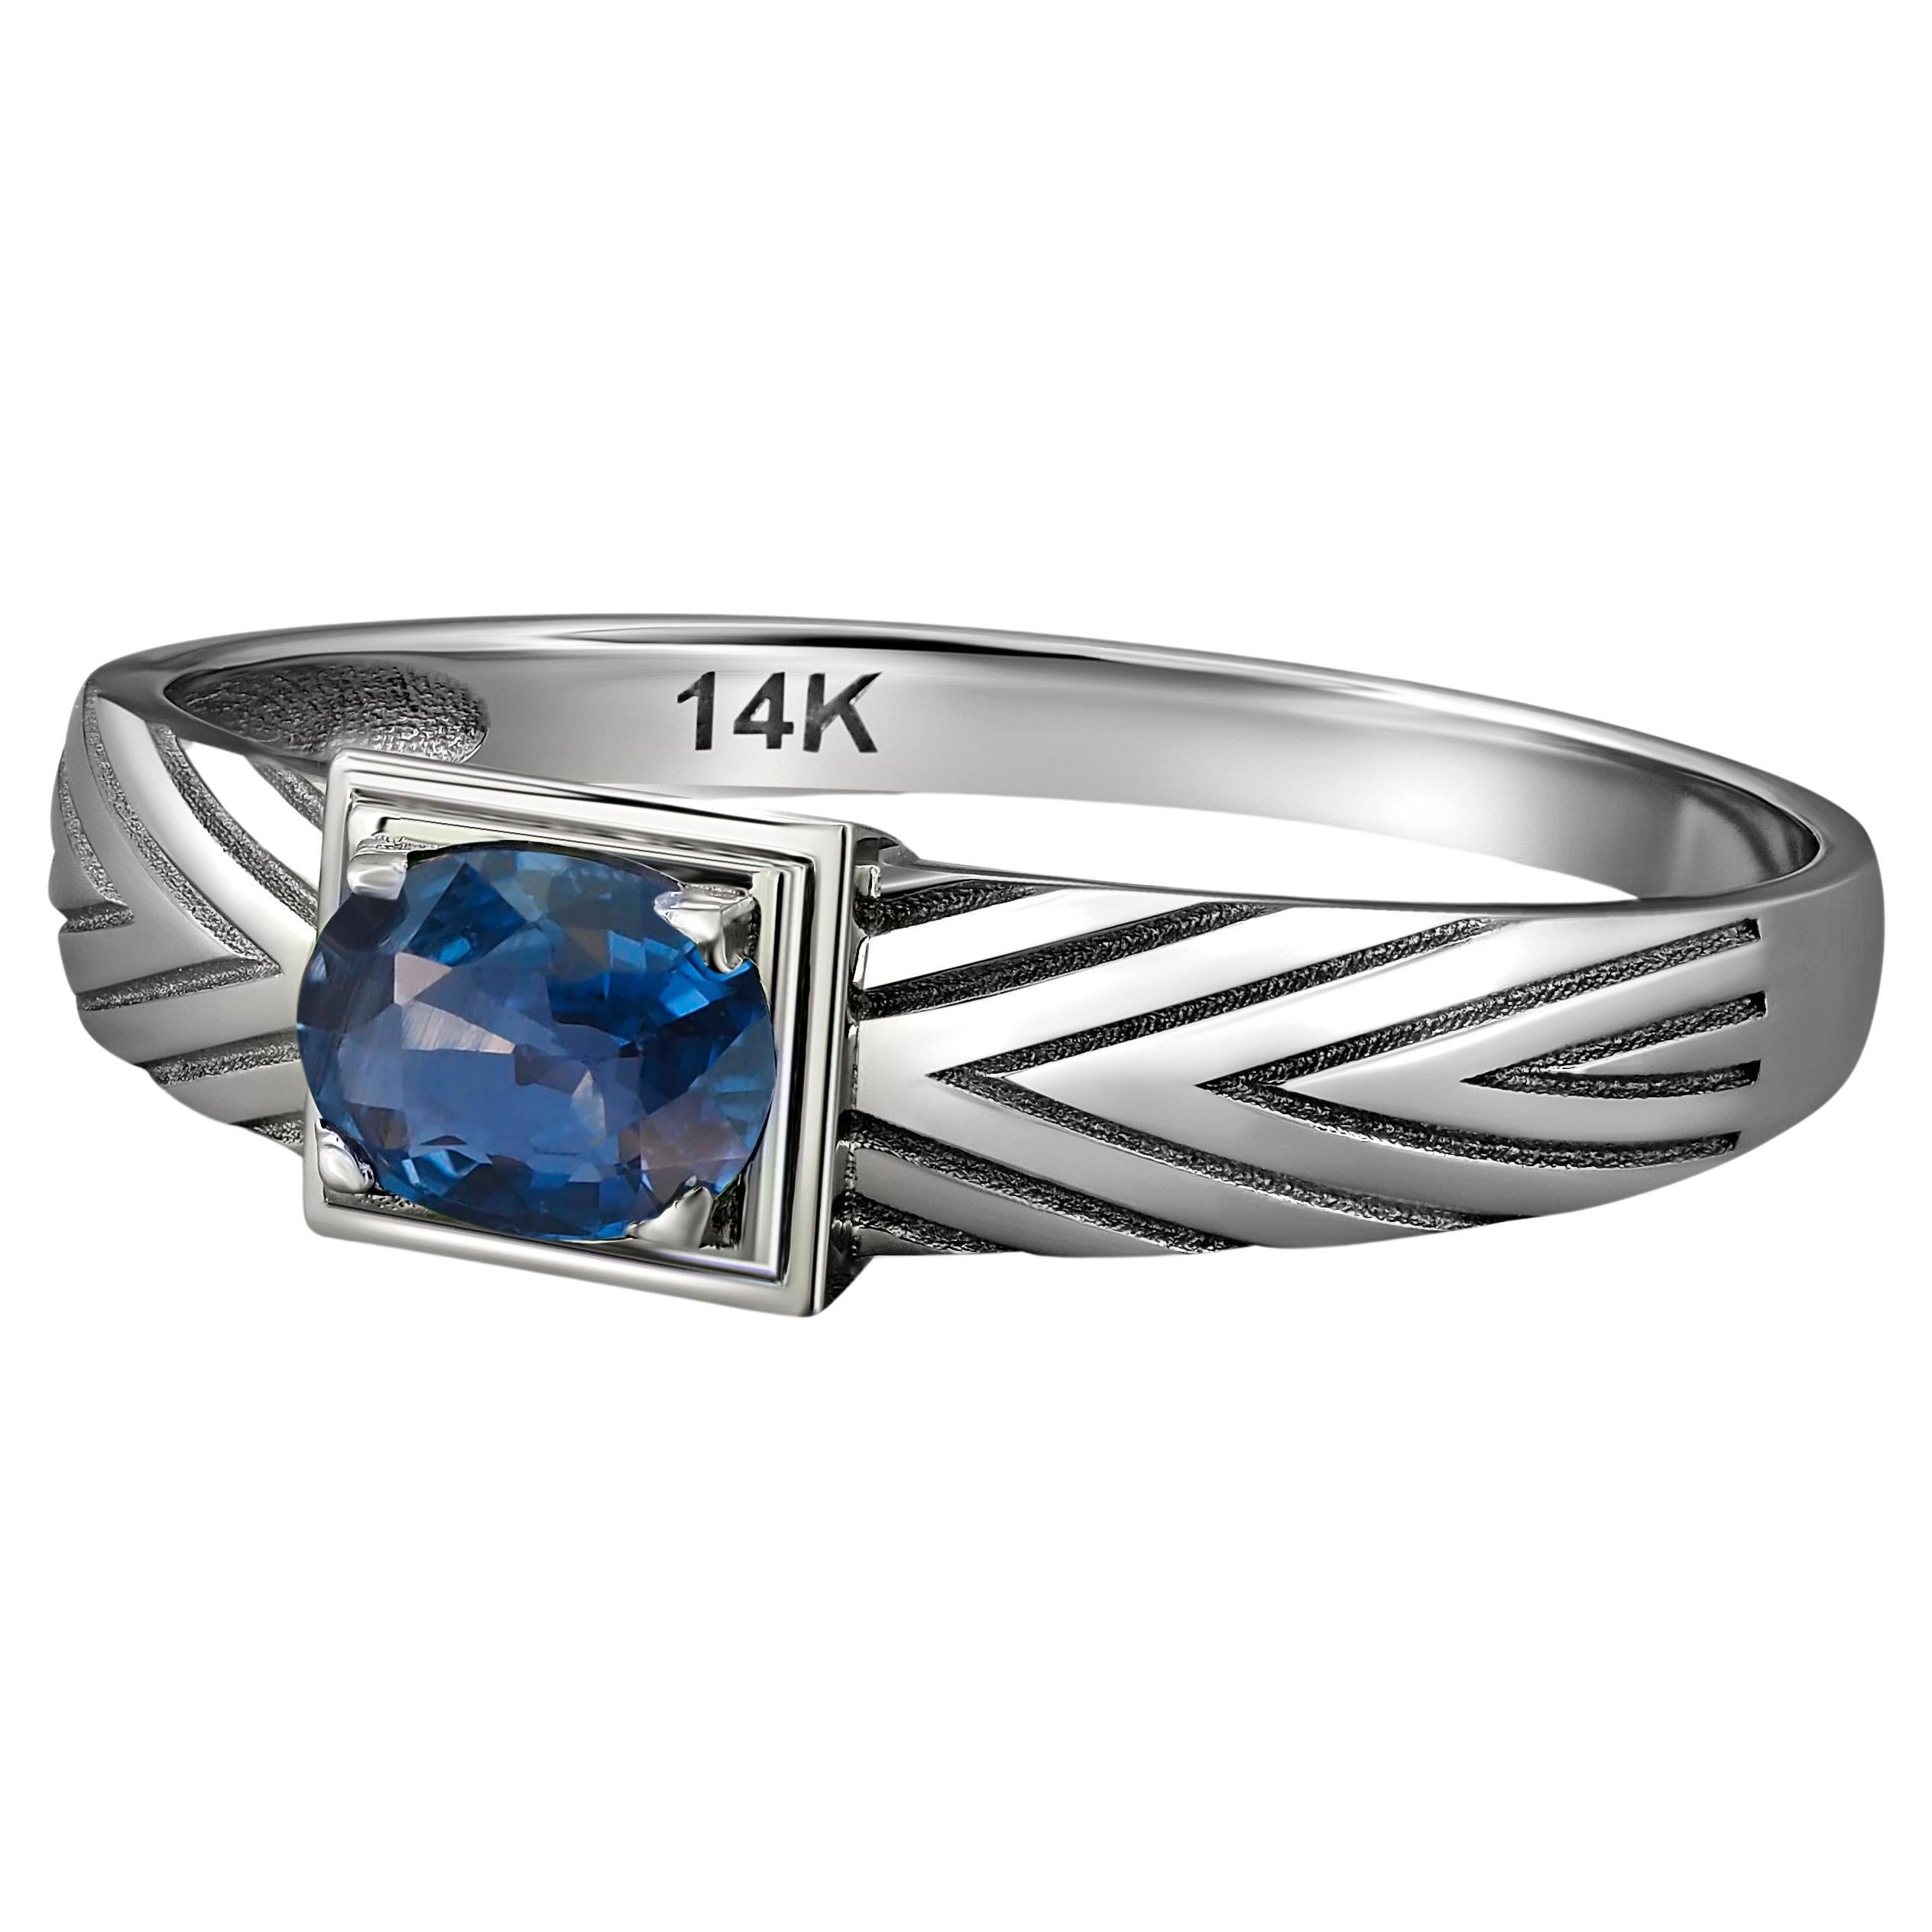 14k Gold Mens Ring with Sapphire. 